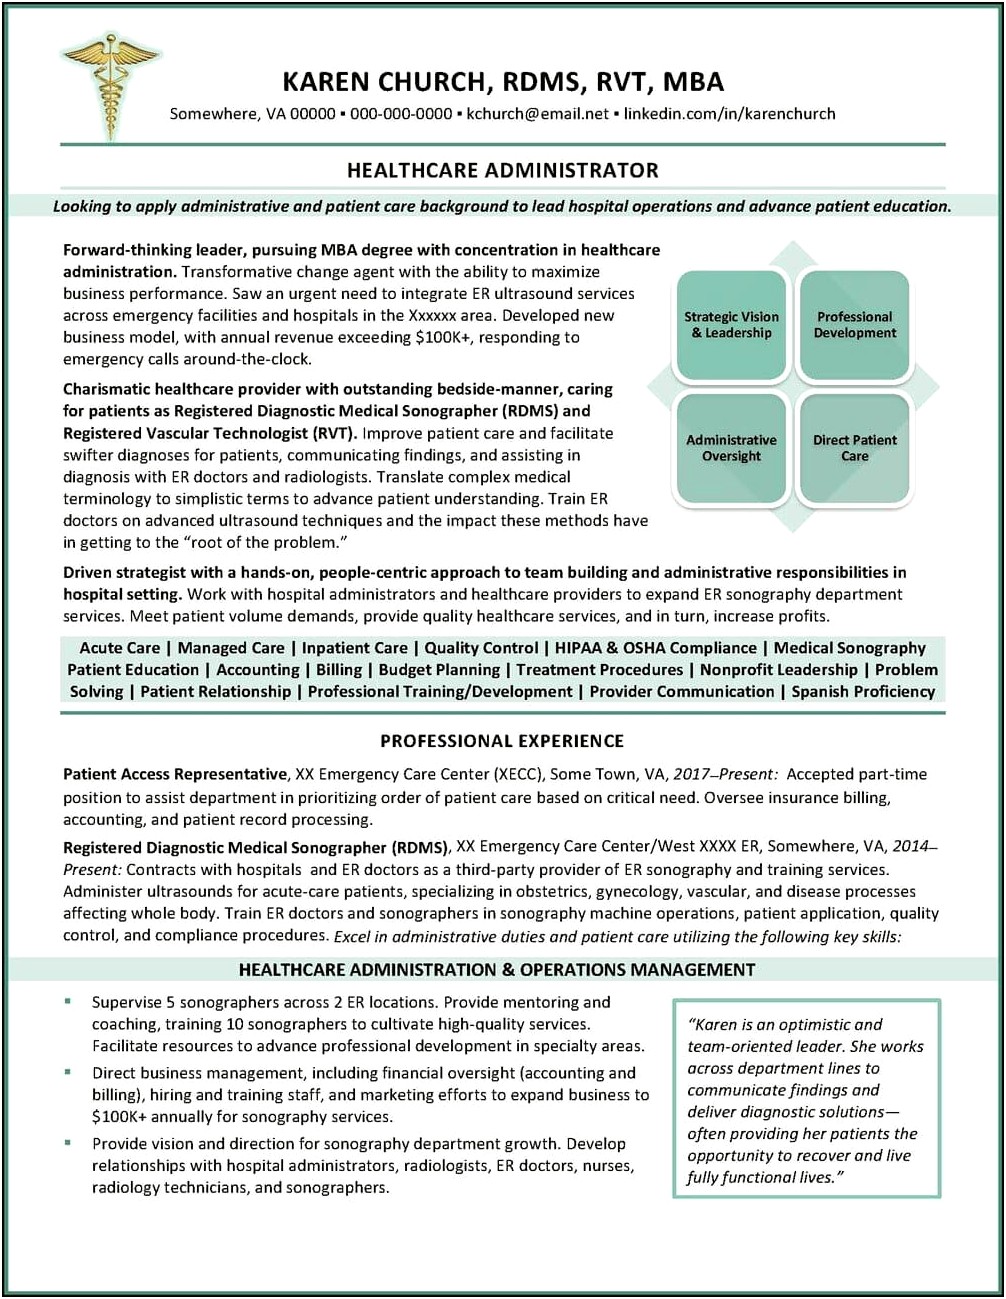 Free Sample Resume For A Hospital Administrator